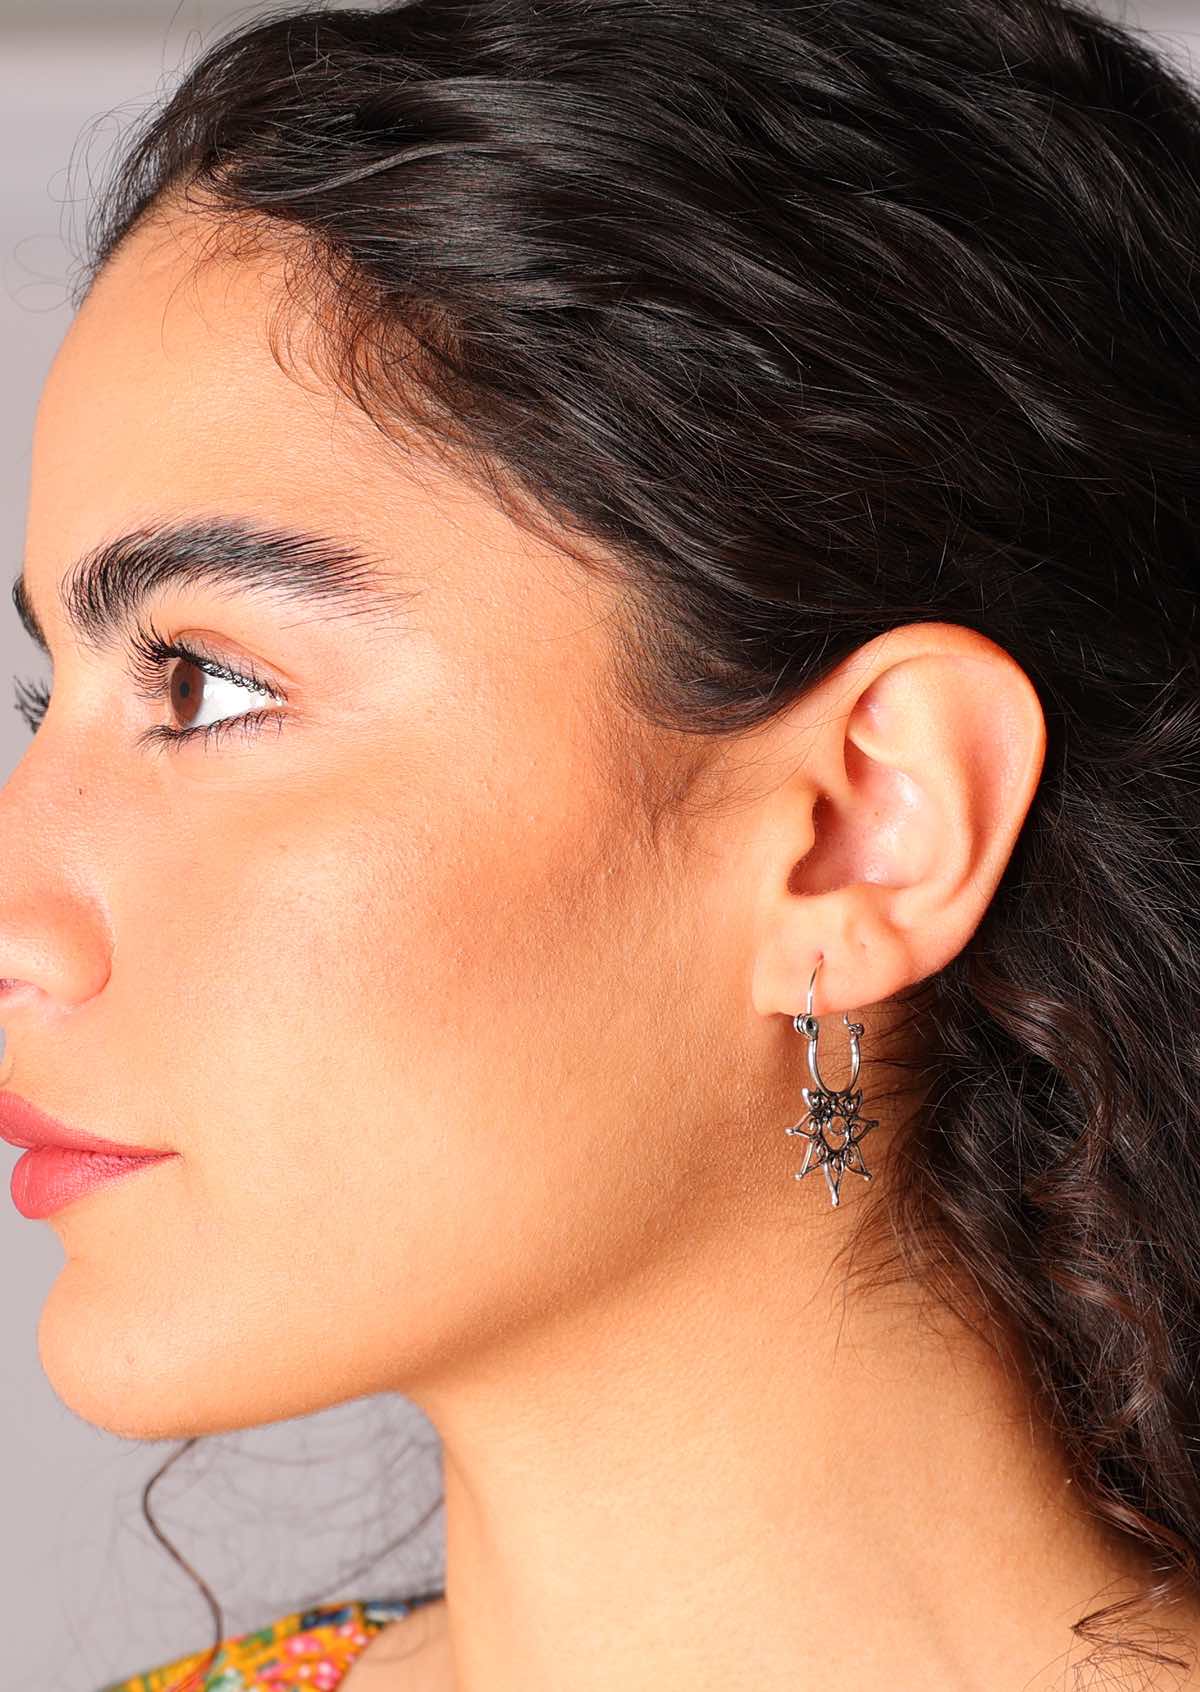 Delicate silver earrings that make a statement